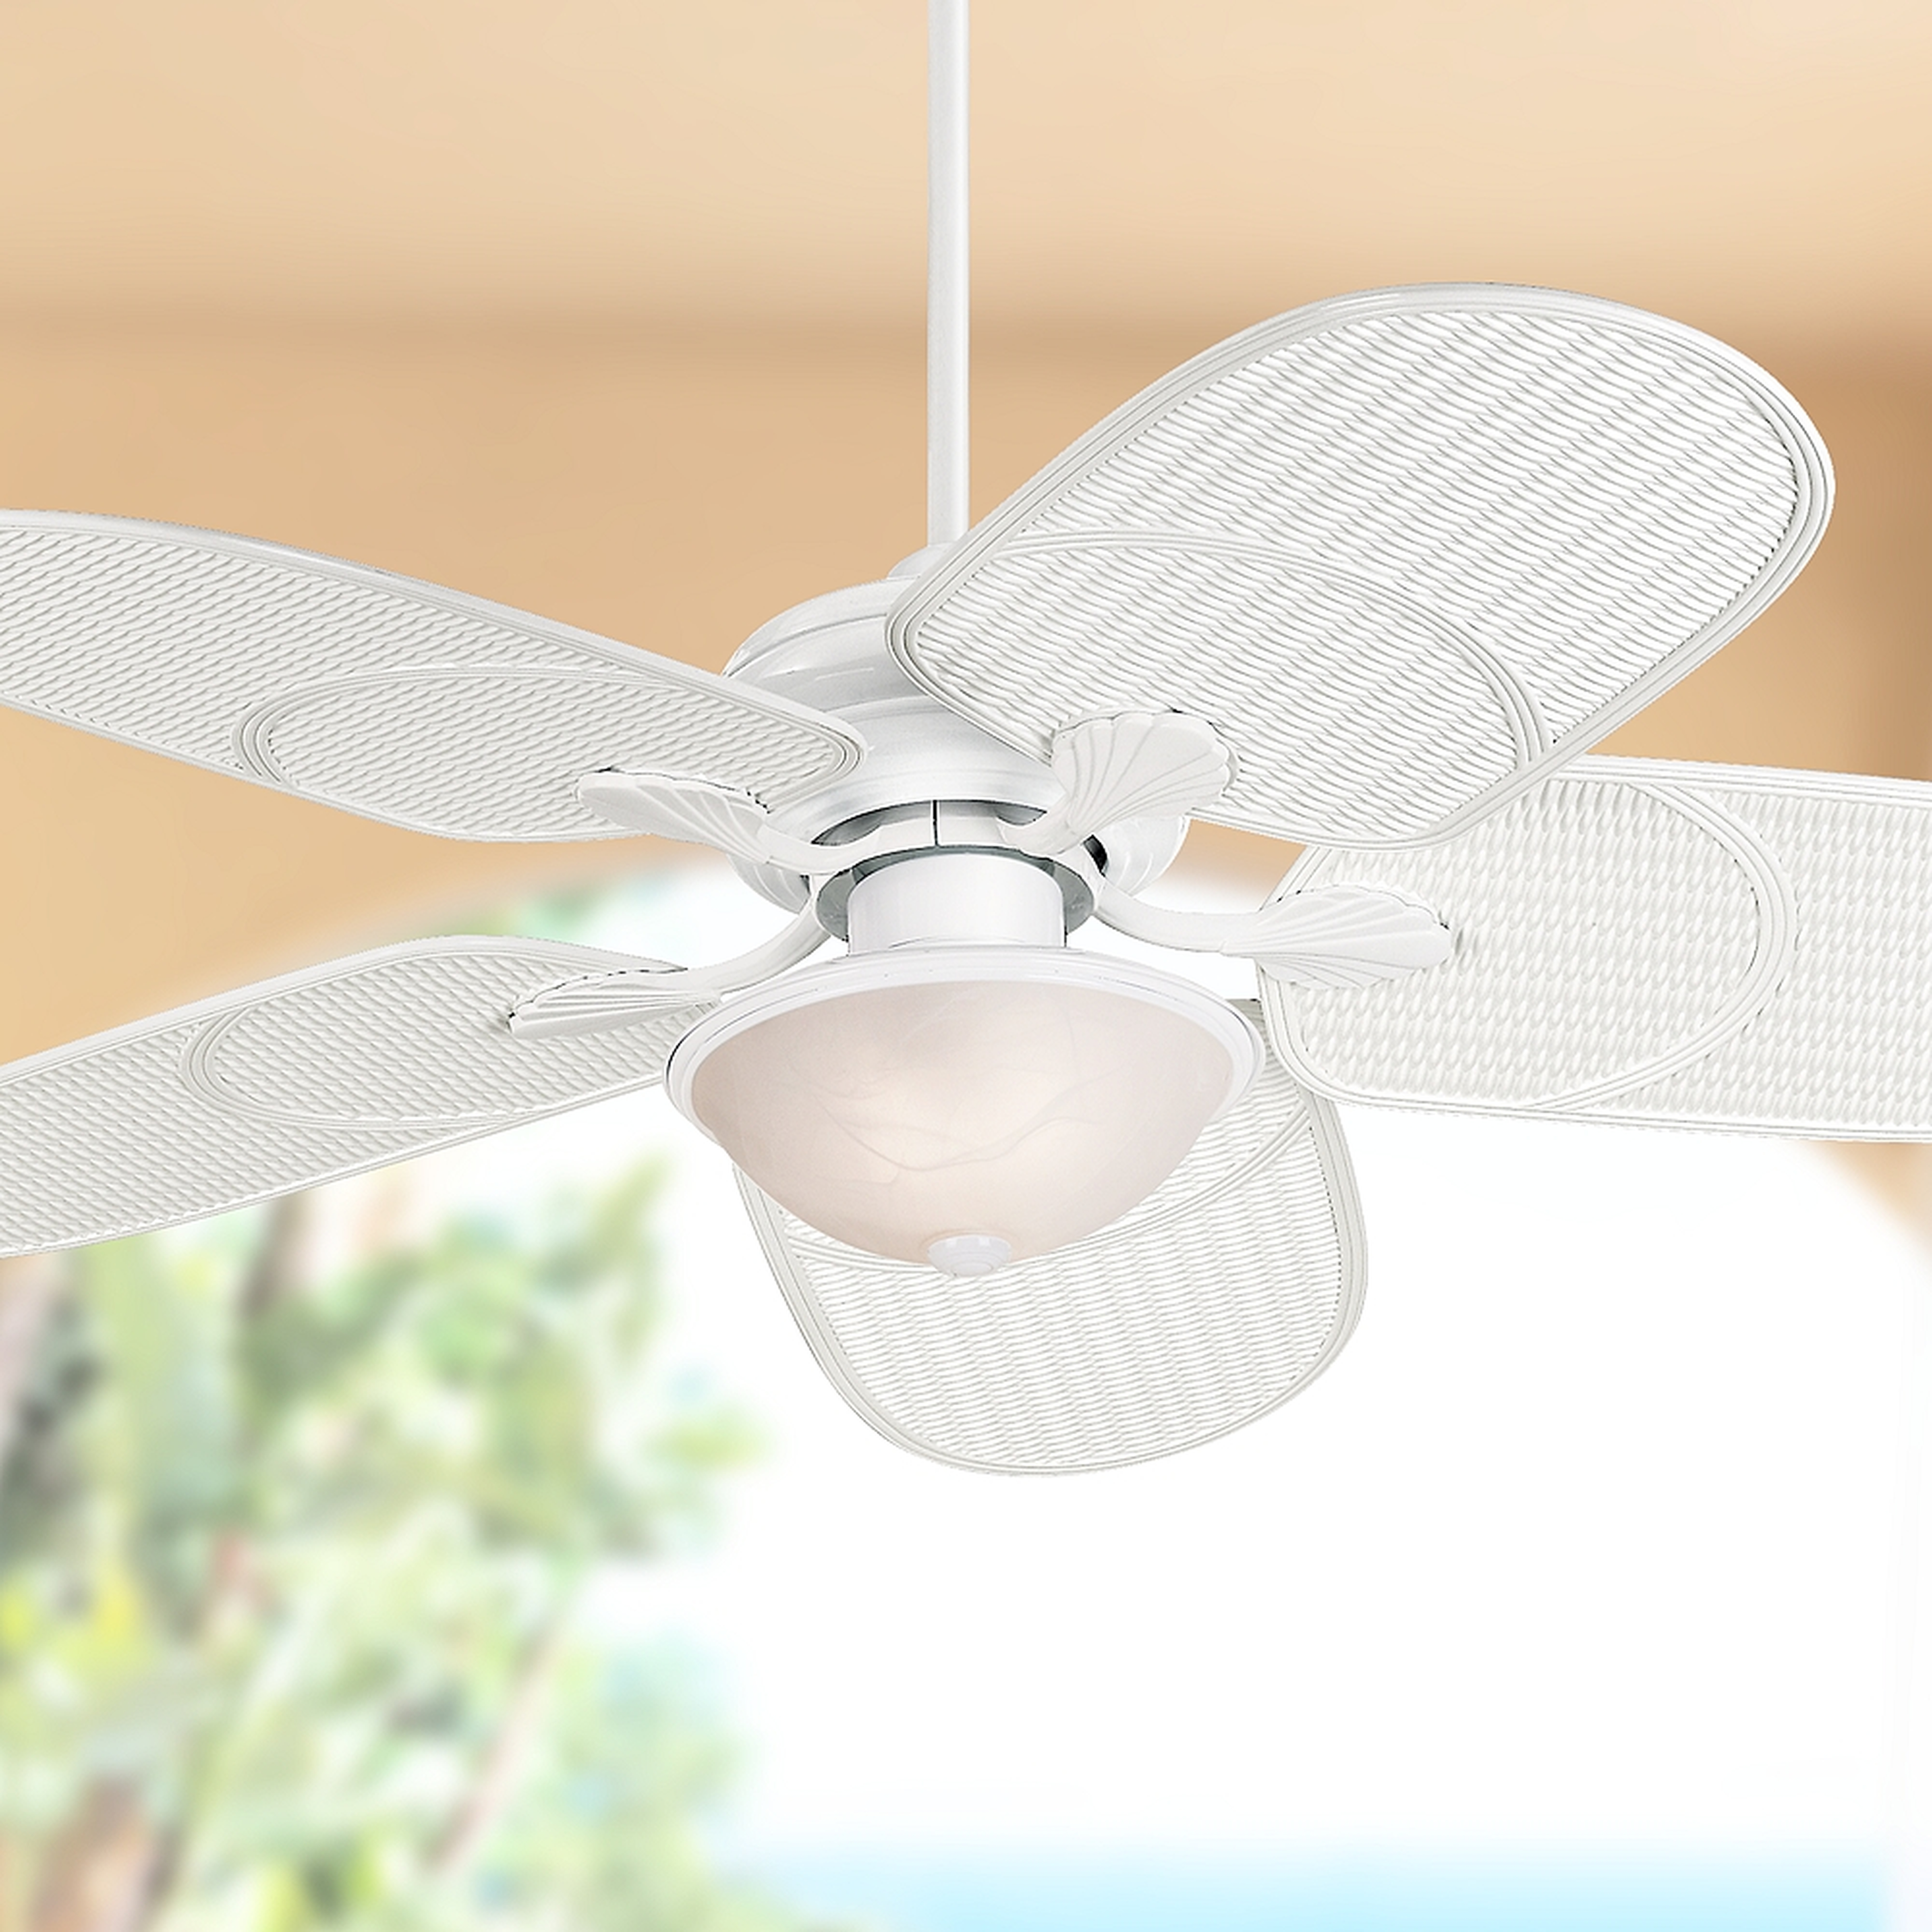 42" Casa Vieja Tropical White Outdoor LED Ceiling Fan - Style # 70T16 - Lamps Plus